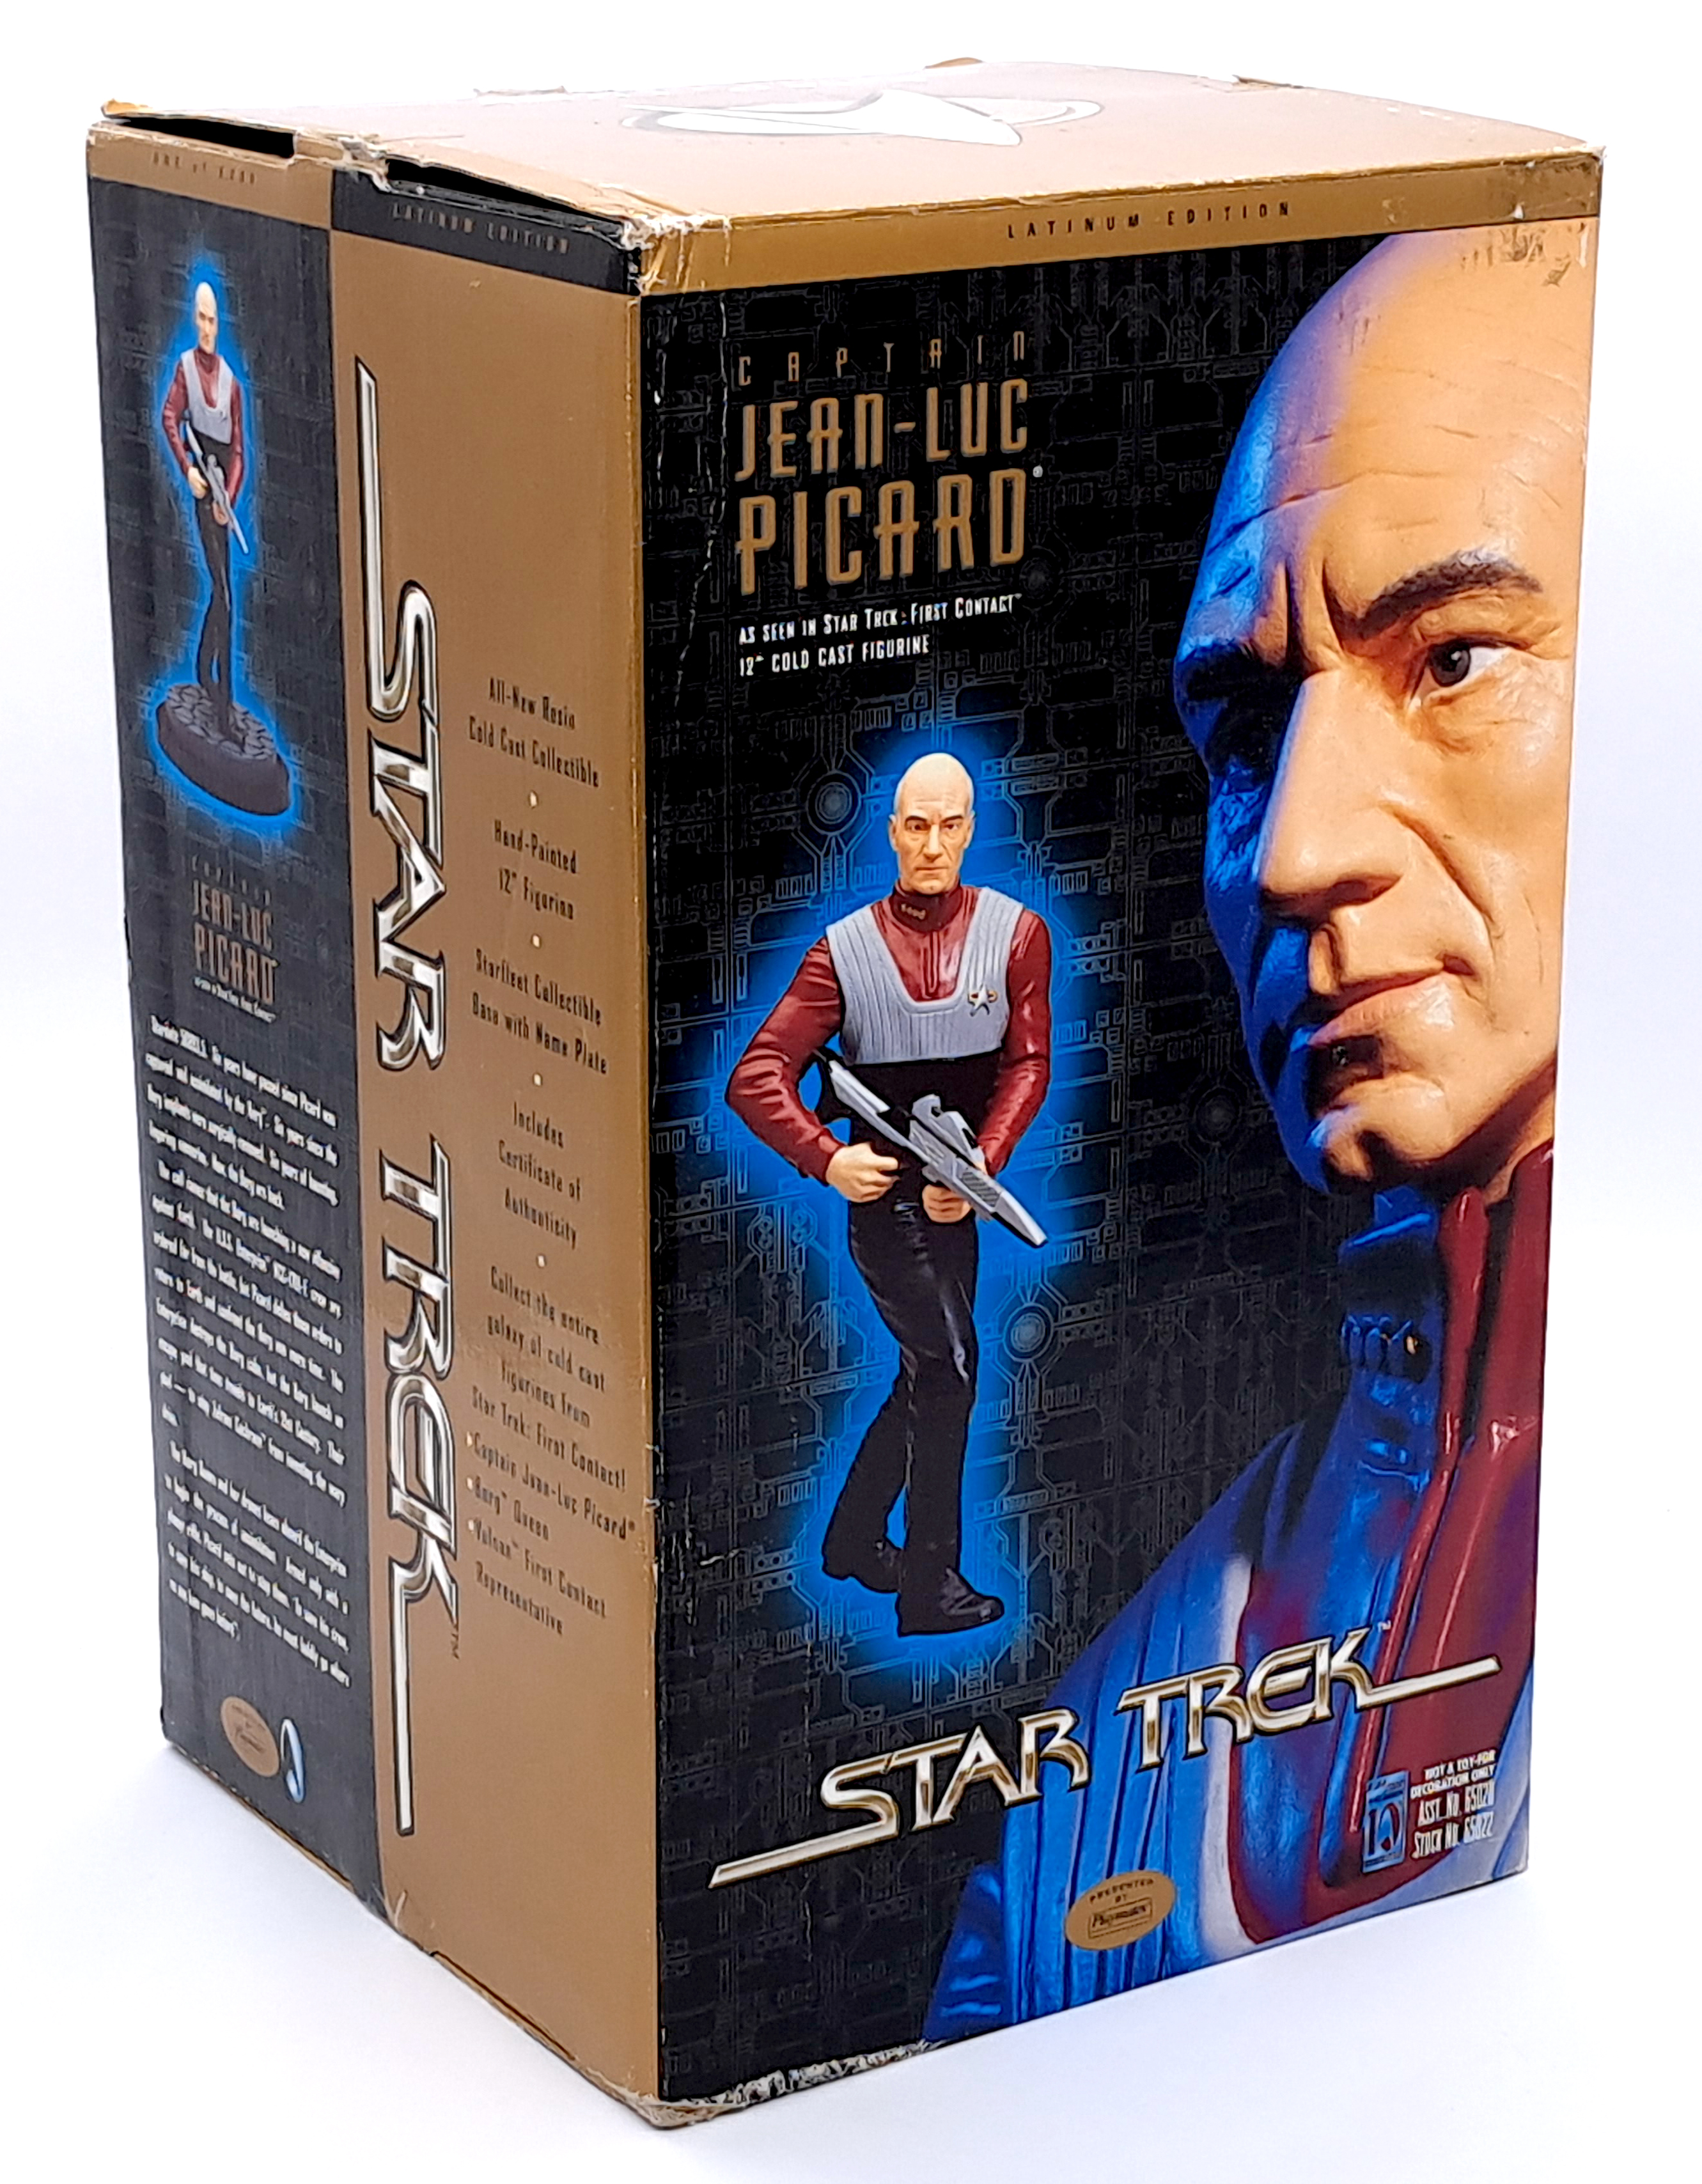 Playmates Star Trek First Contact Captain Jean-Luc Picard Cold Cast Resin 12" Figurine